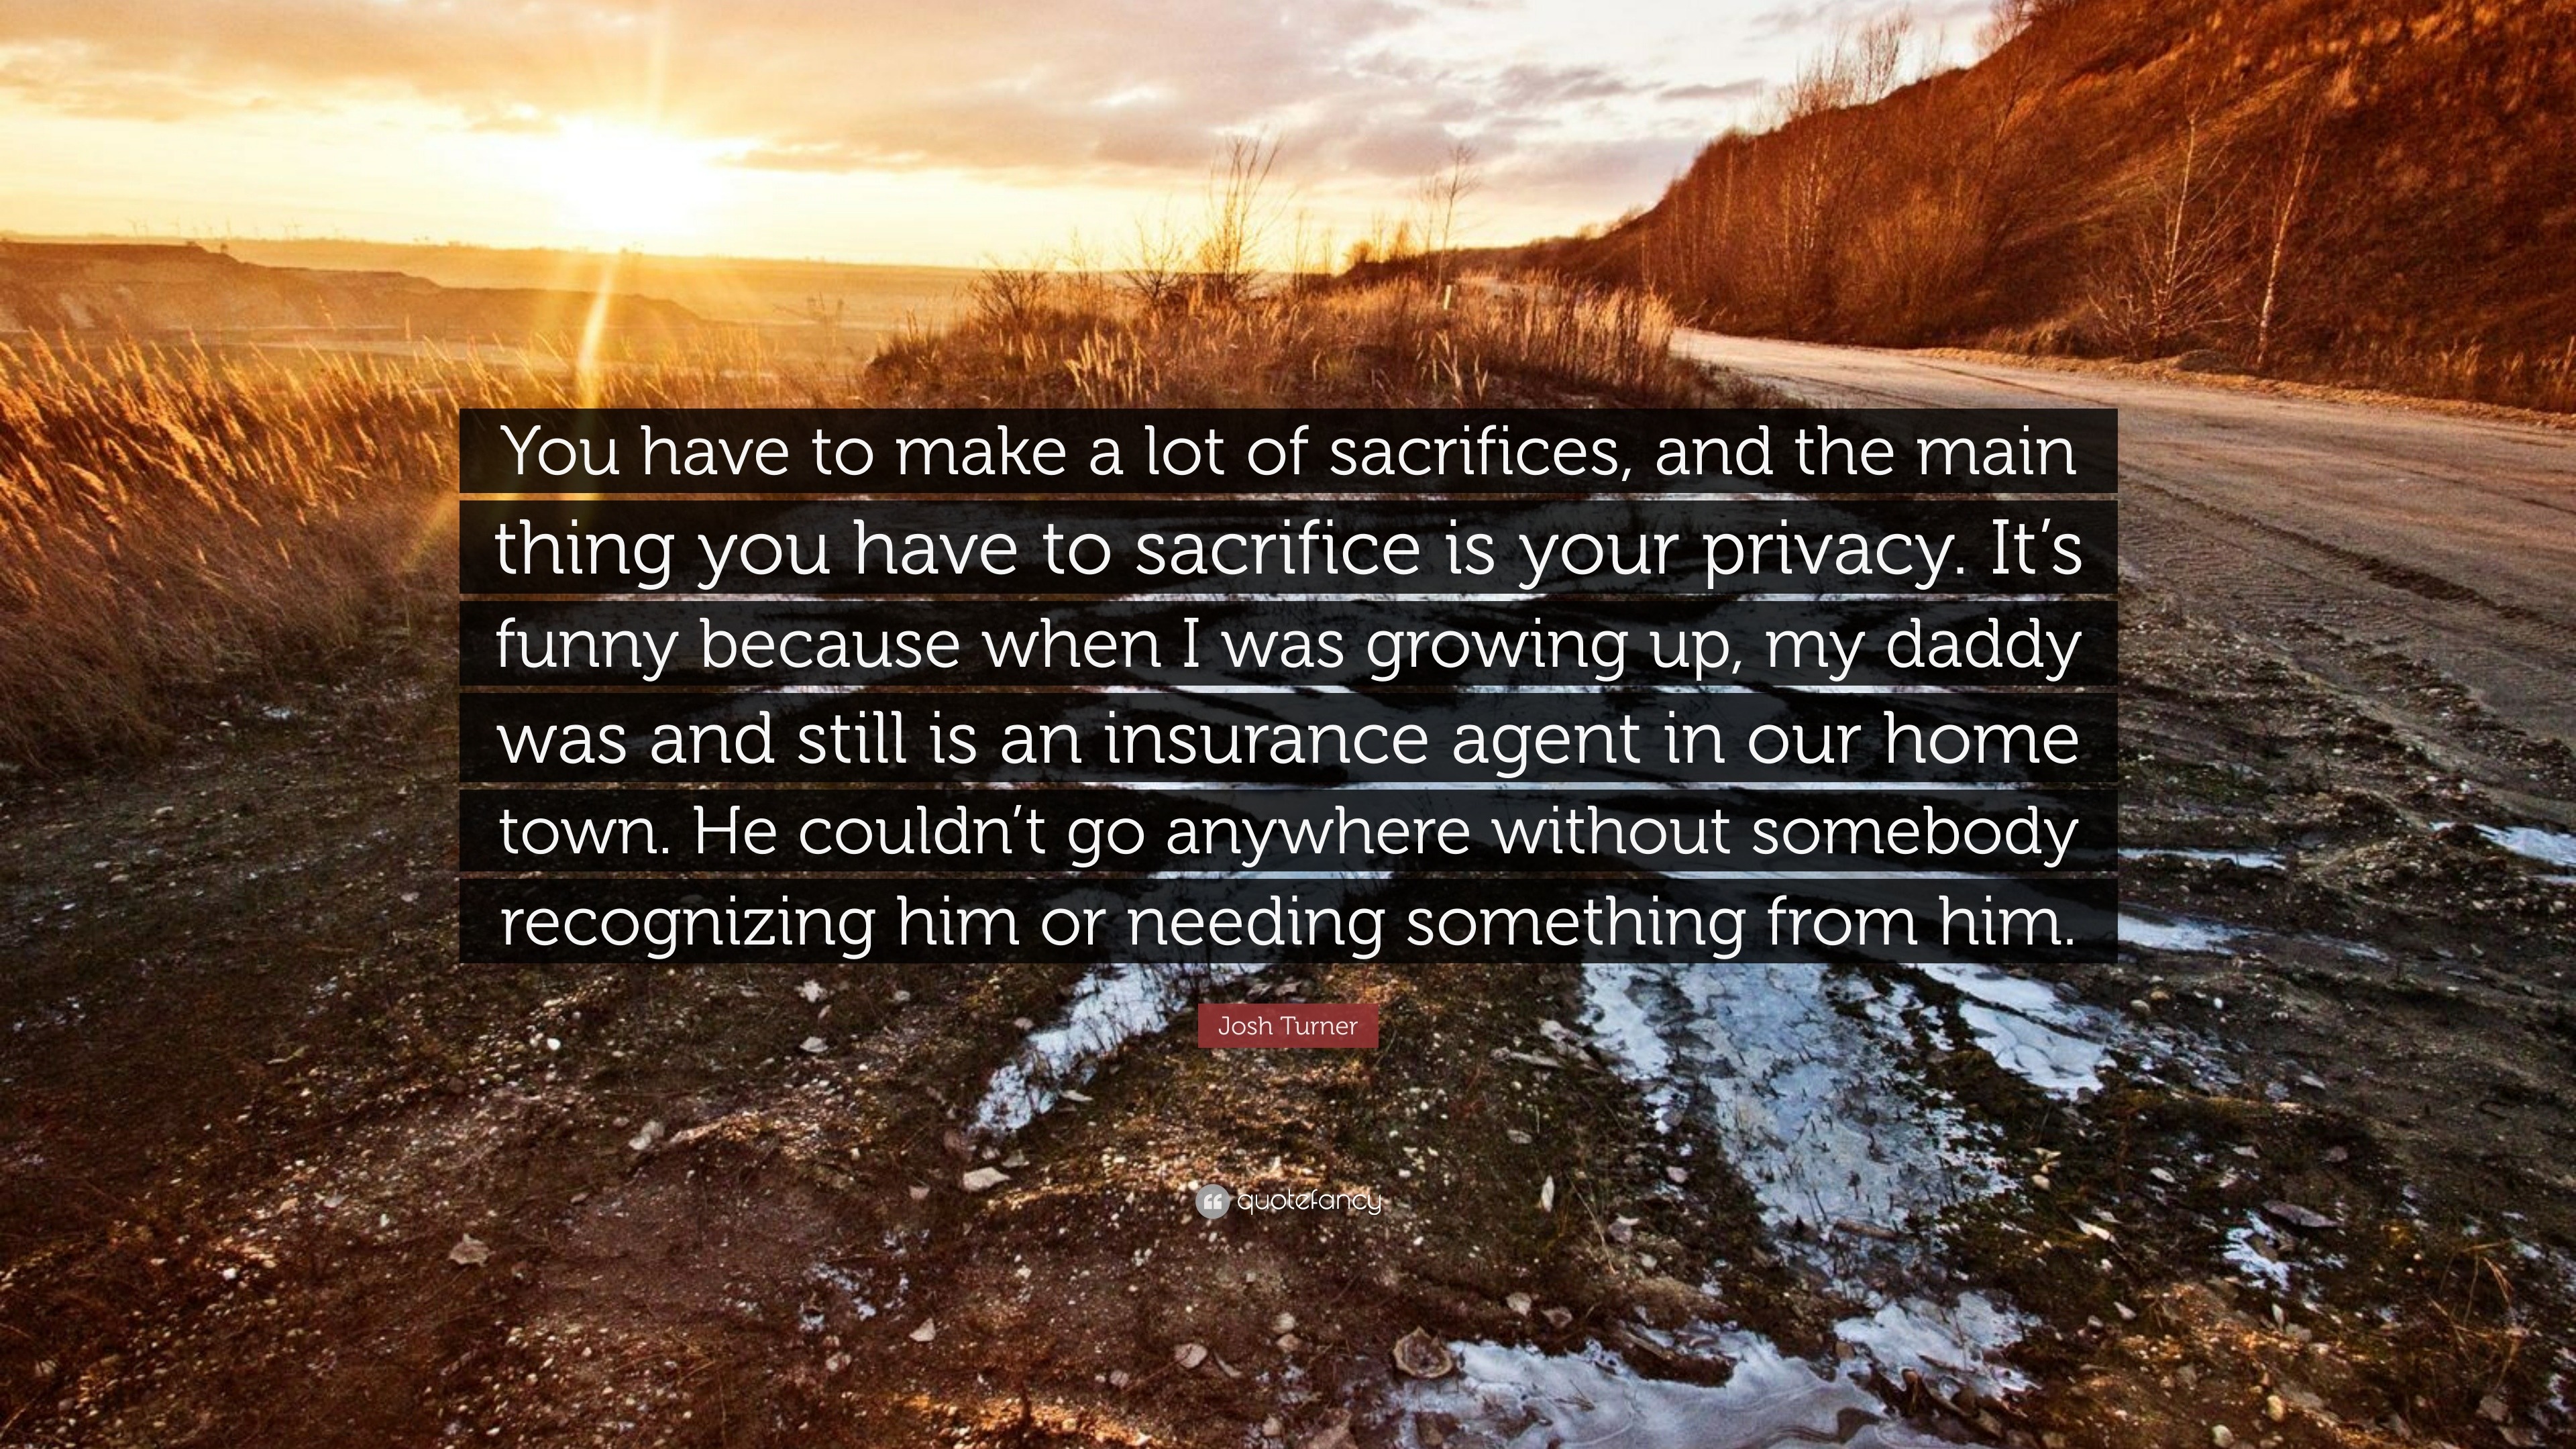 Josh Turner Quote: “You have to make a lot of sacrifices, and the main  thing you have to sacrifice is your privacy. It's funny because when ...”